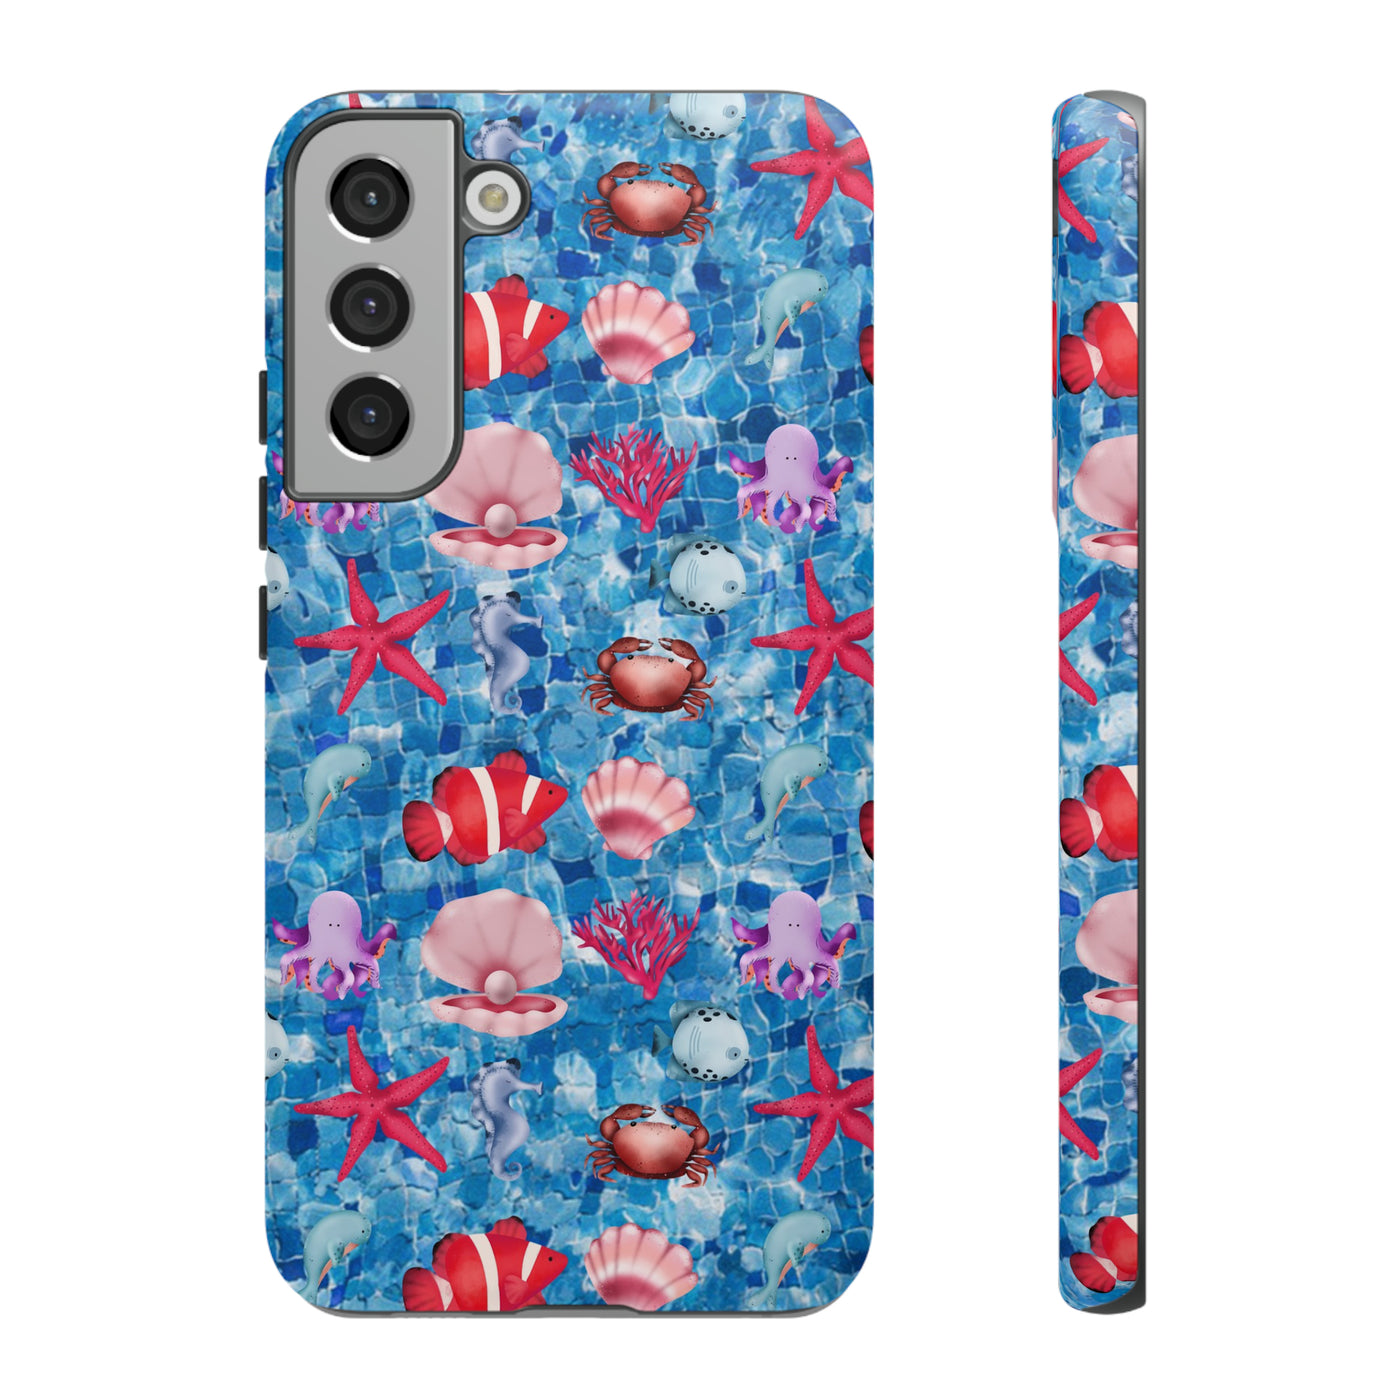 Cute Samsung Phone Case | Aesthetic Samsung Phone Case | Galaxy S23, S22, S21, S20 | Under The Sea, Protective Phone Case